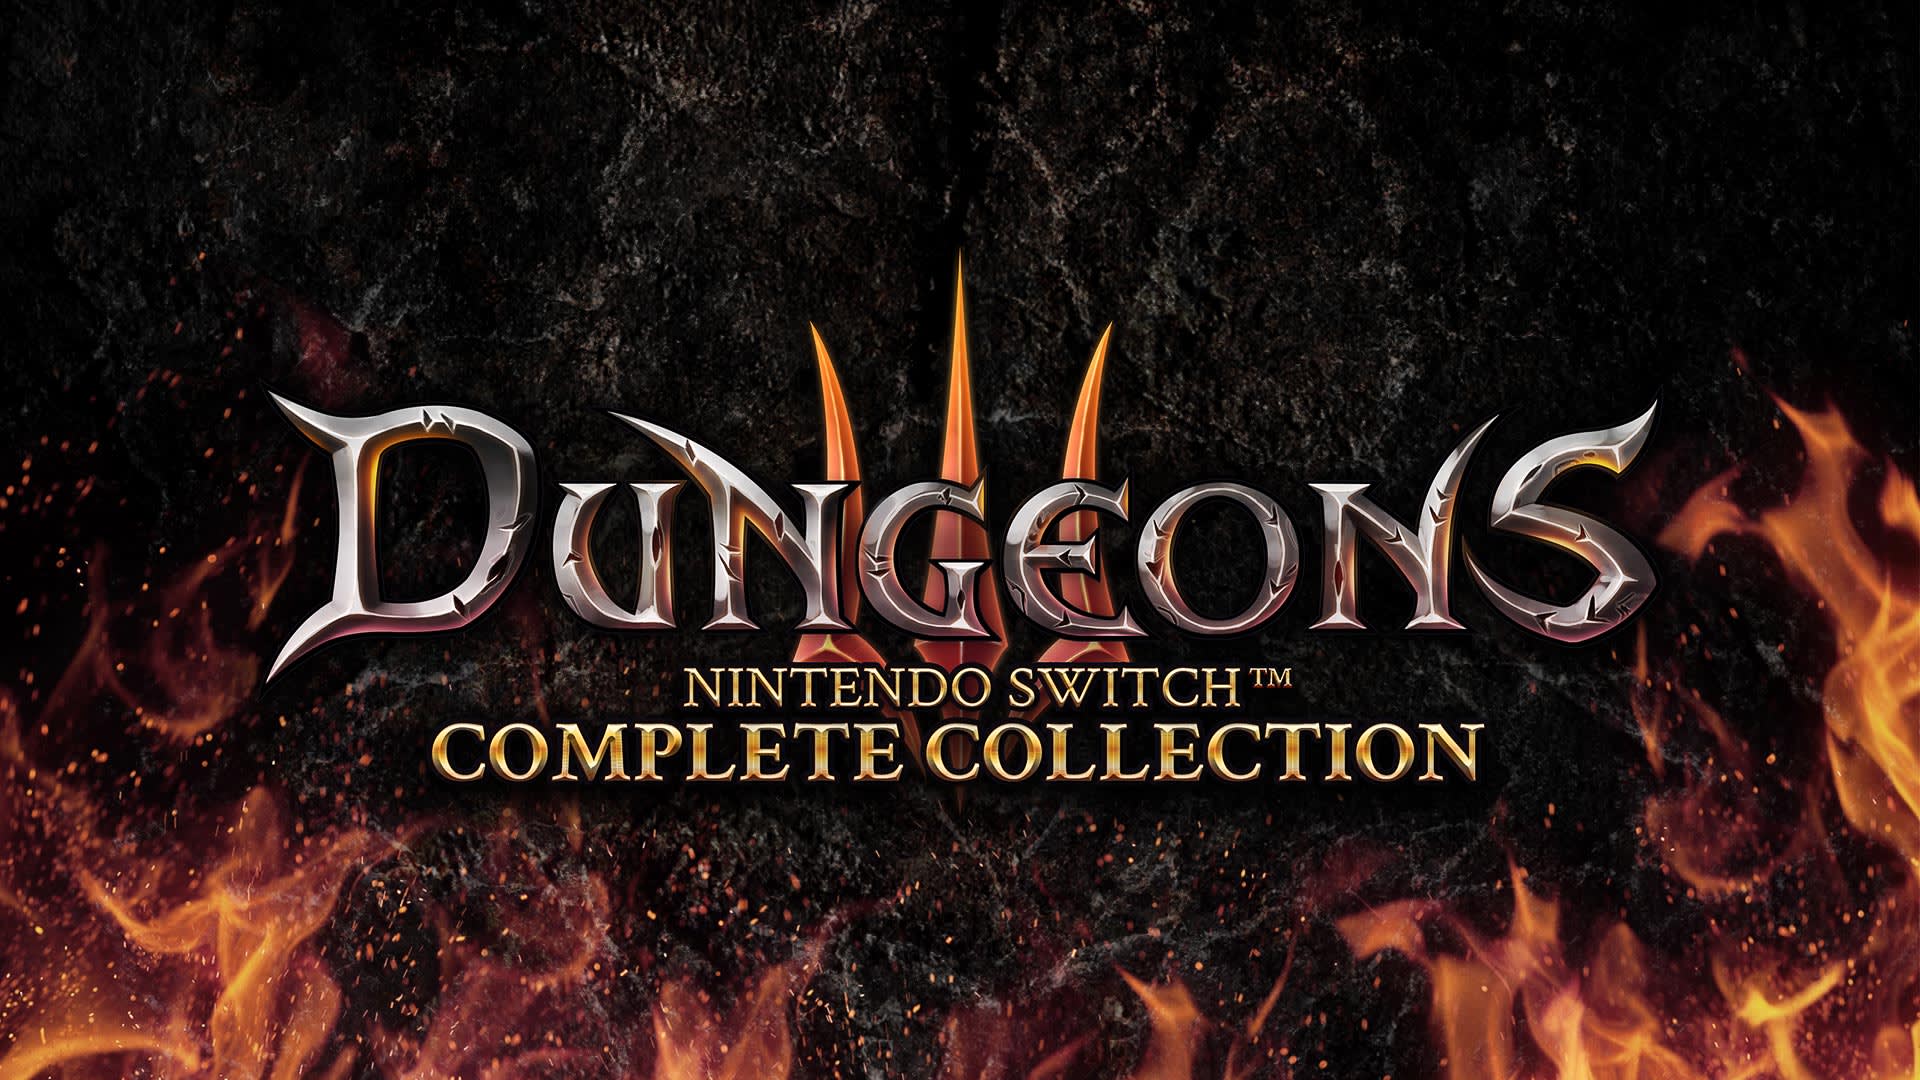 Dungeons 3 - Nintendo Switch™ Complete Collection